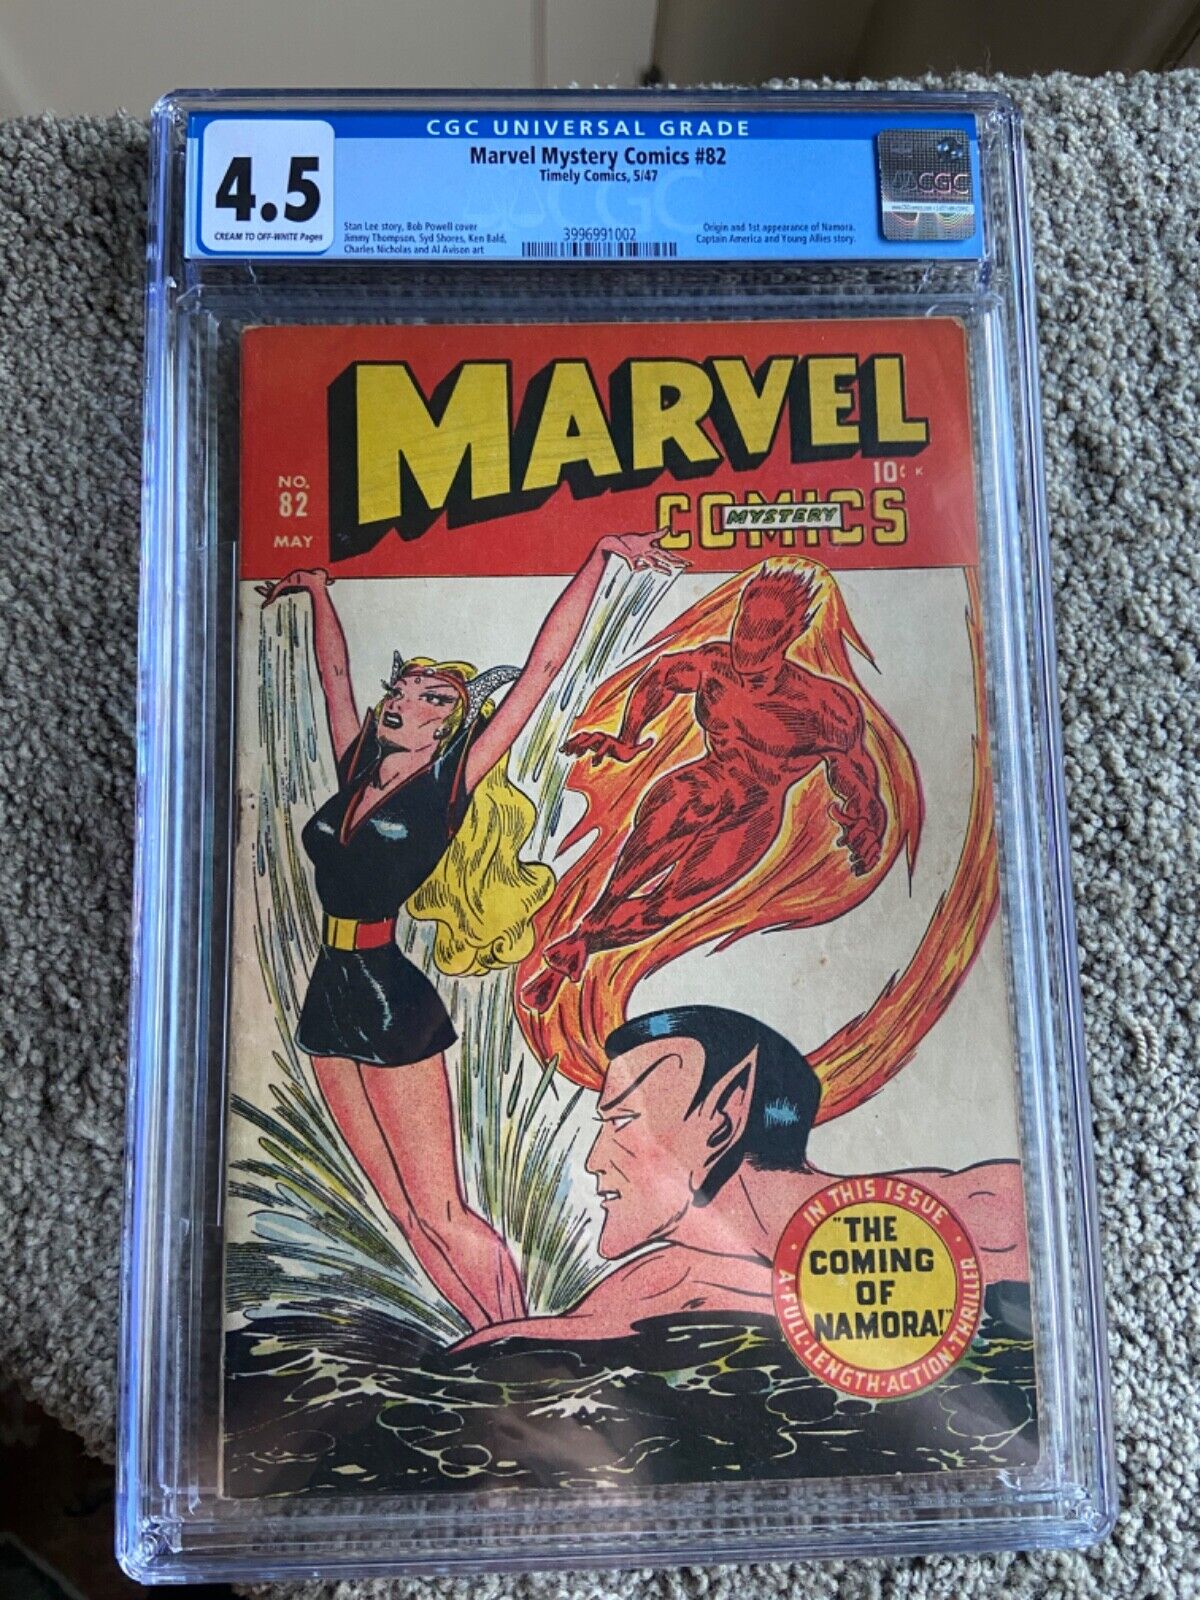 RARE 1947 TIMELY GOLDEN AGE MARVEL MYSTERY COMICS 82 CGC 45 UNIVERSAL NAMORA